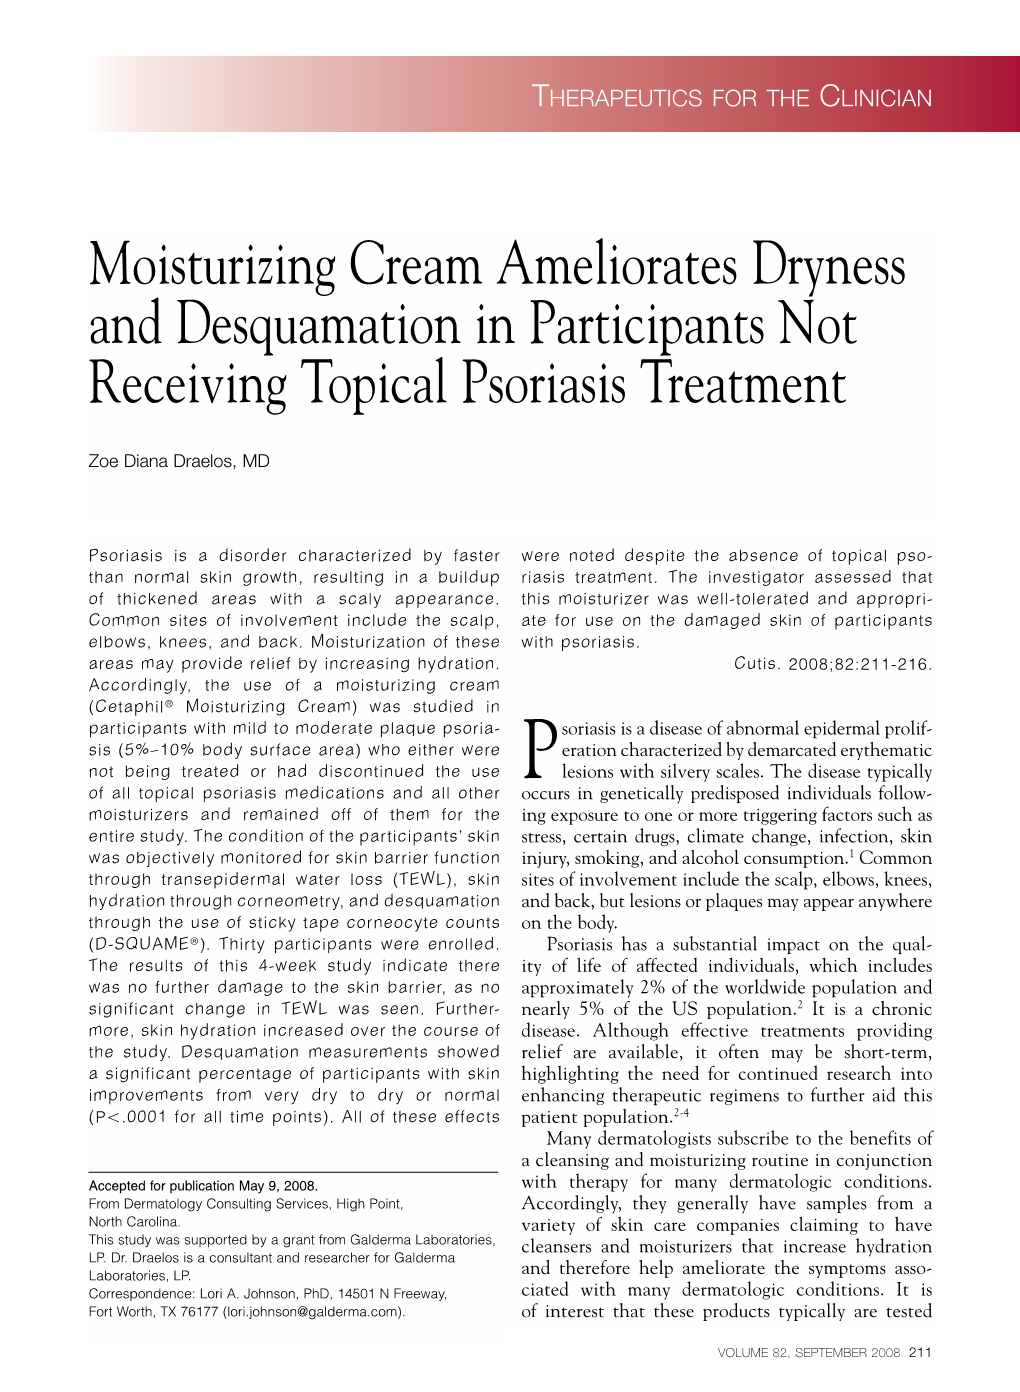 Moisturizing Cream Ameliorates Dryness and Desquamation in Participants Not Receiving Topical Psoriasis Treatment